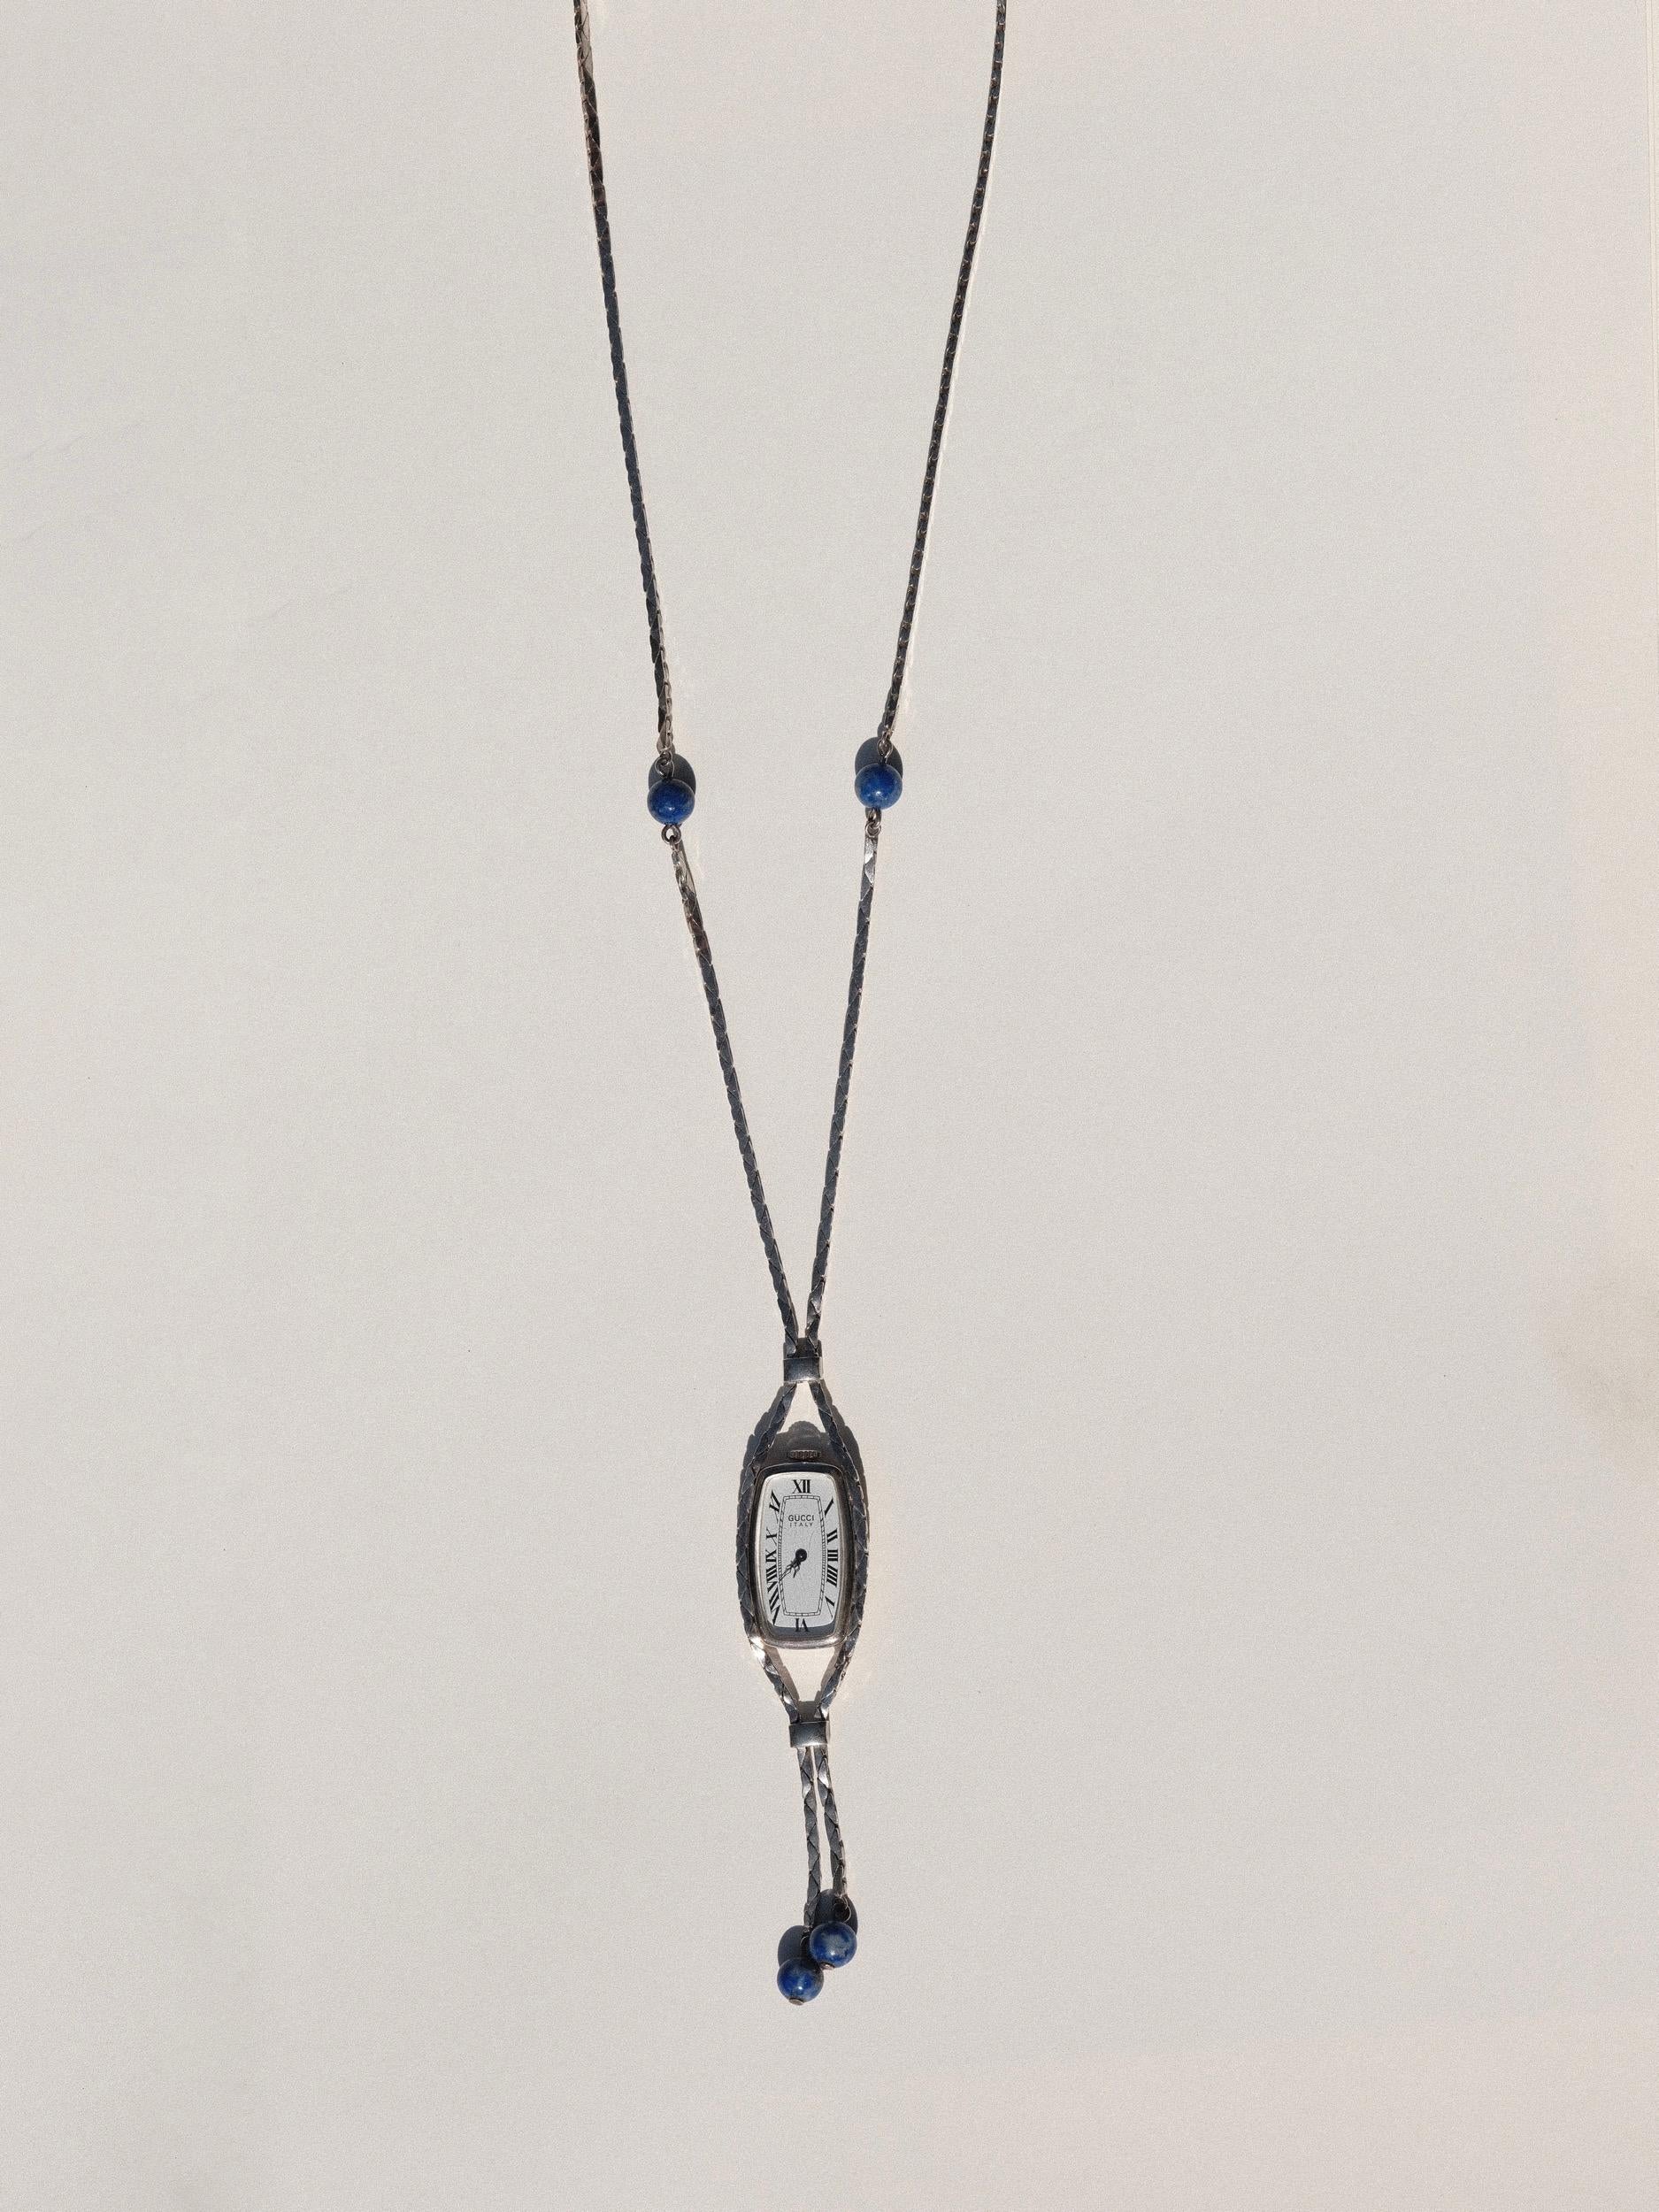 Gucci Watch Necklace Sterling Silver with Lapis Lazuli Beads 1980's  8